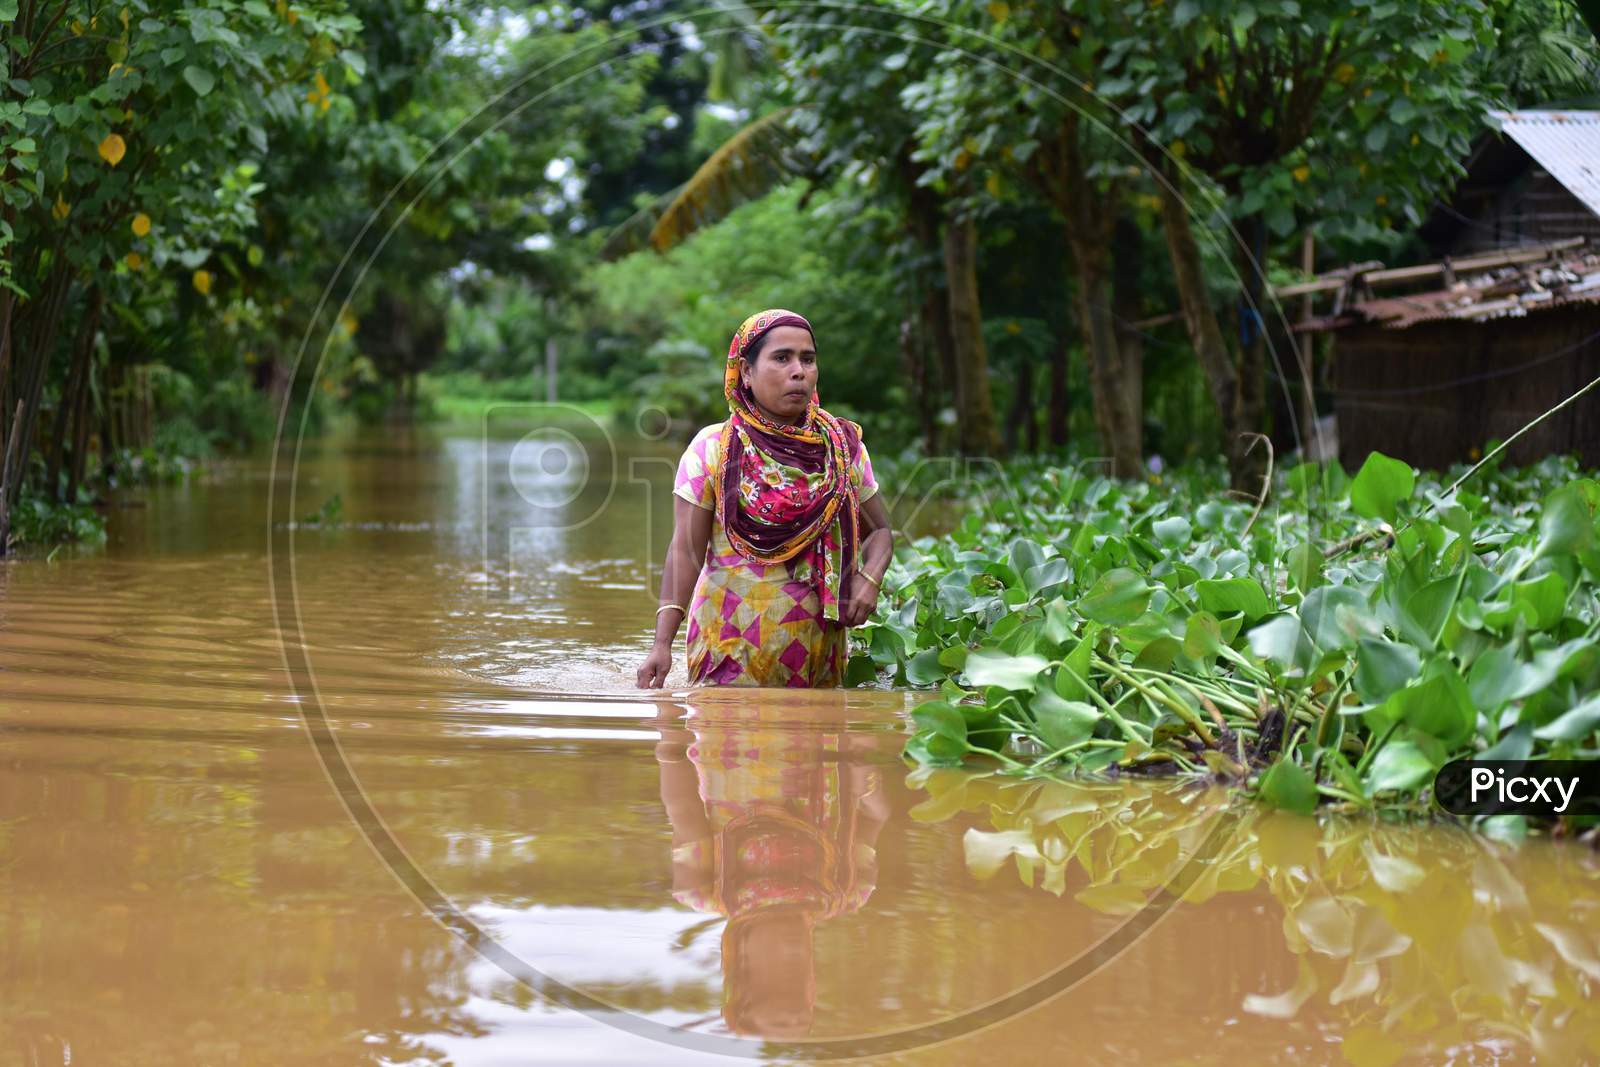 A woman wades through floodwaters in a flood-affected village in Nagaon, Assam on July 22, 2020